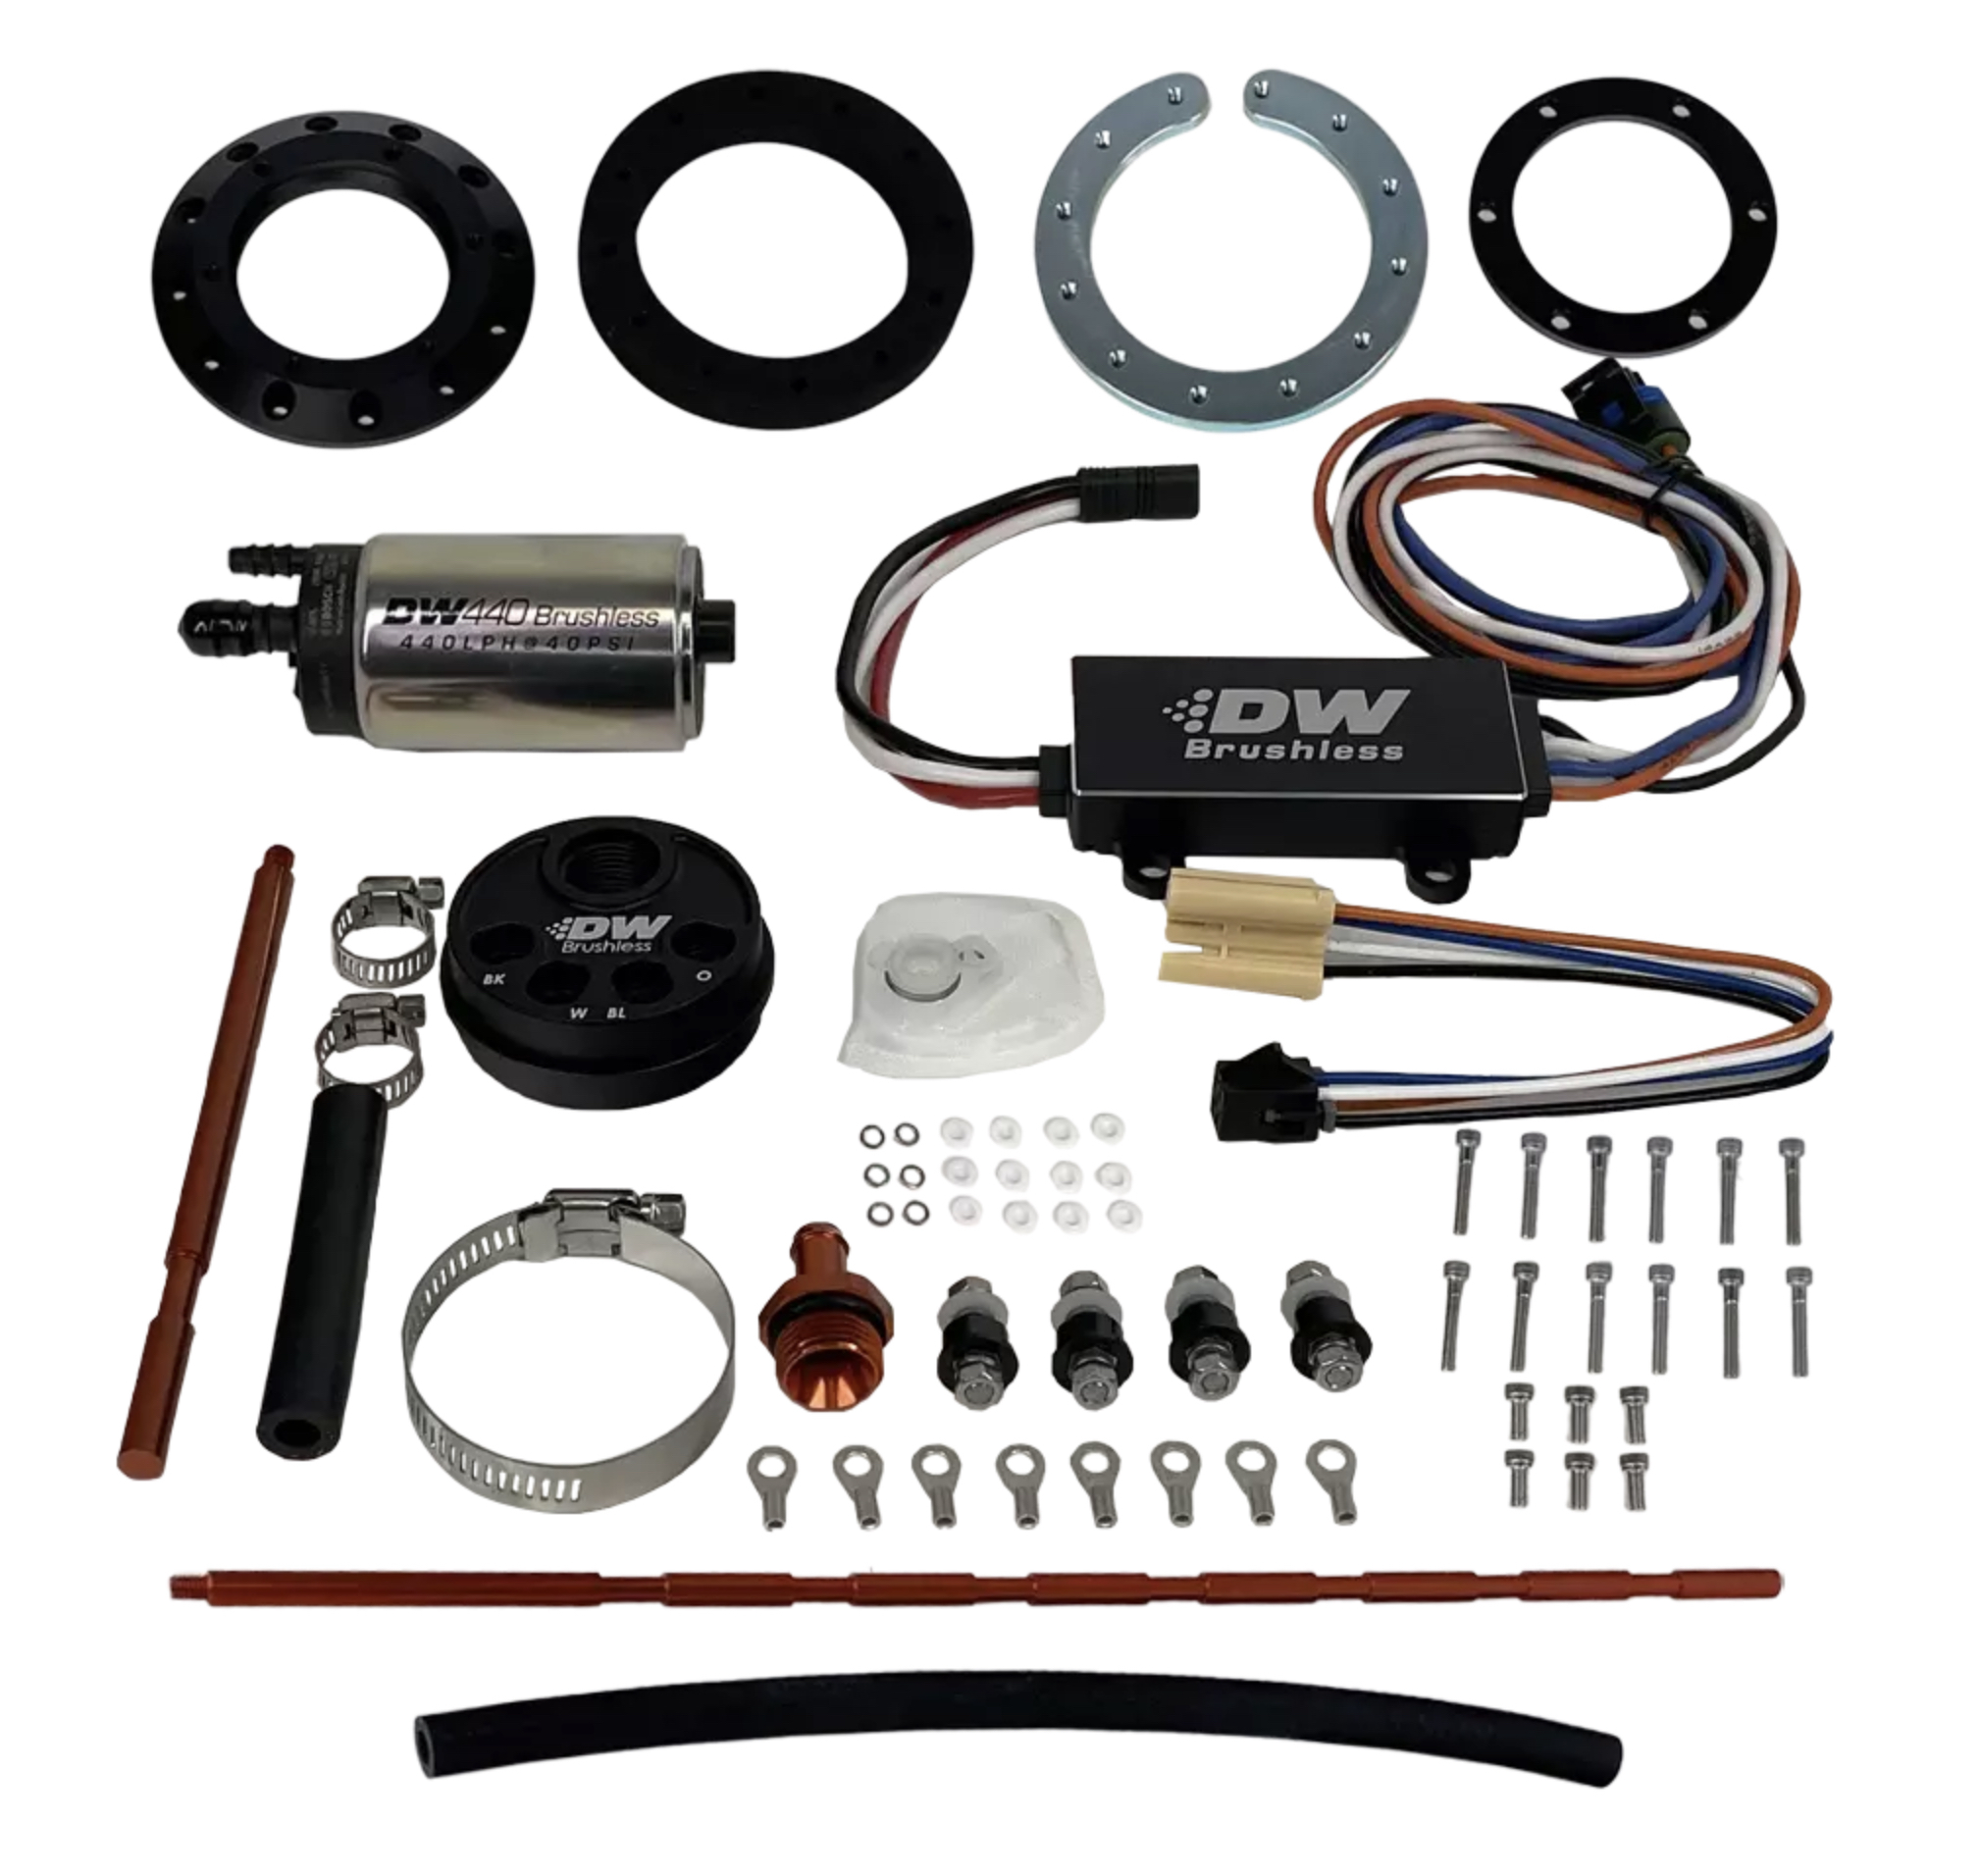 Deatschwerks 9-441-C102-5008 Fuel Pump, DW440, Electric, In-Tank, Mounting Collar Included, 440 lph, Install Kit, Gas / Ethanol, Speed Controller Included, Kit